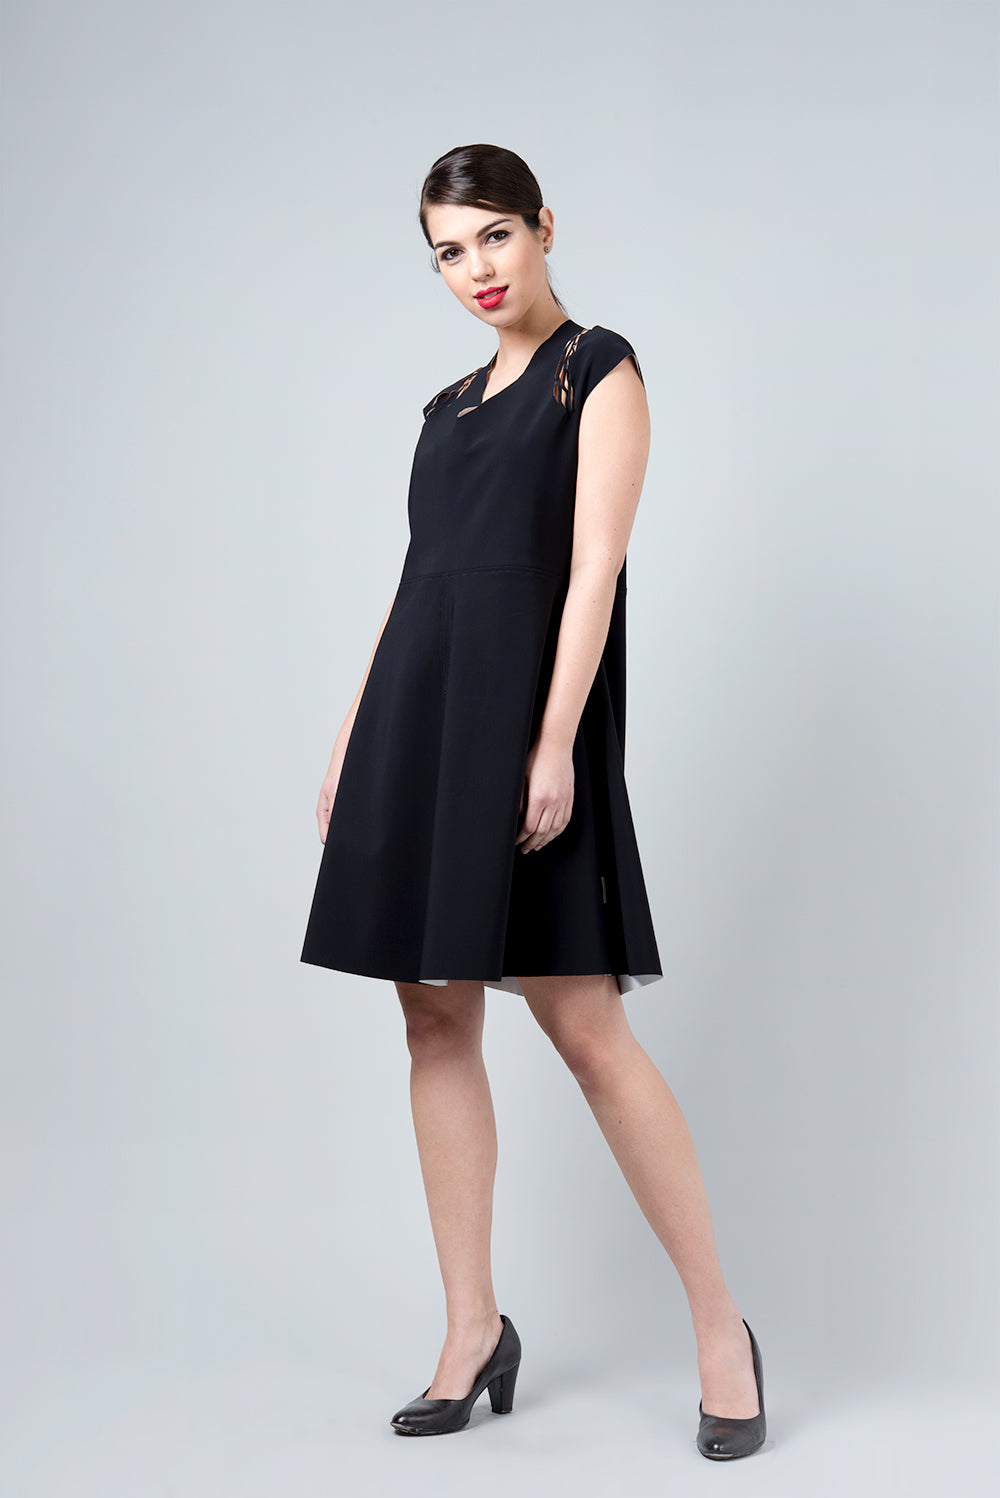 Double sided dress - Gamma inside out dress